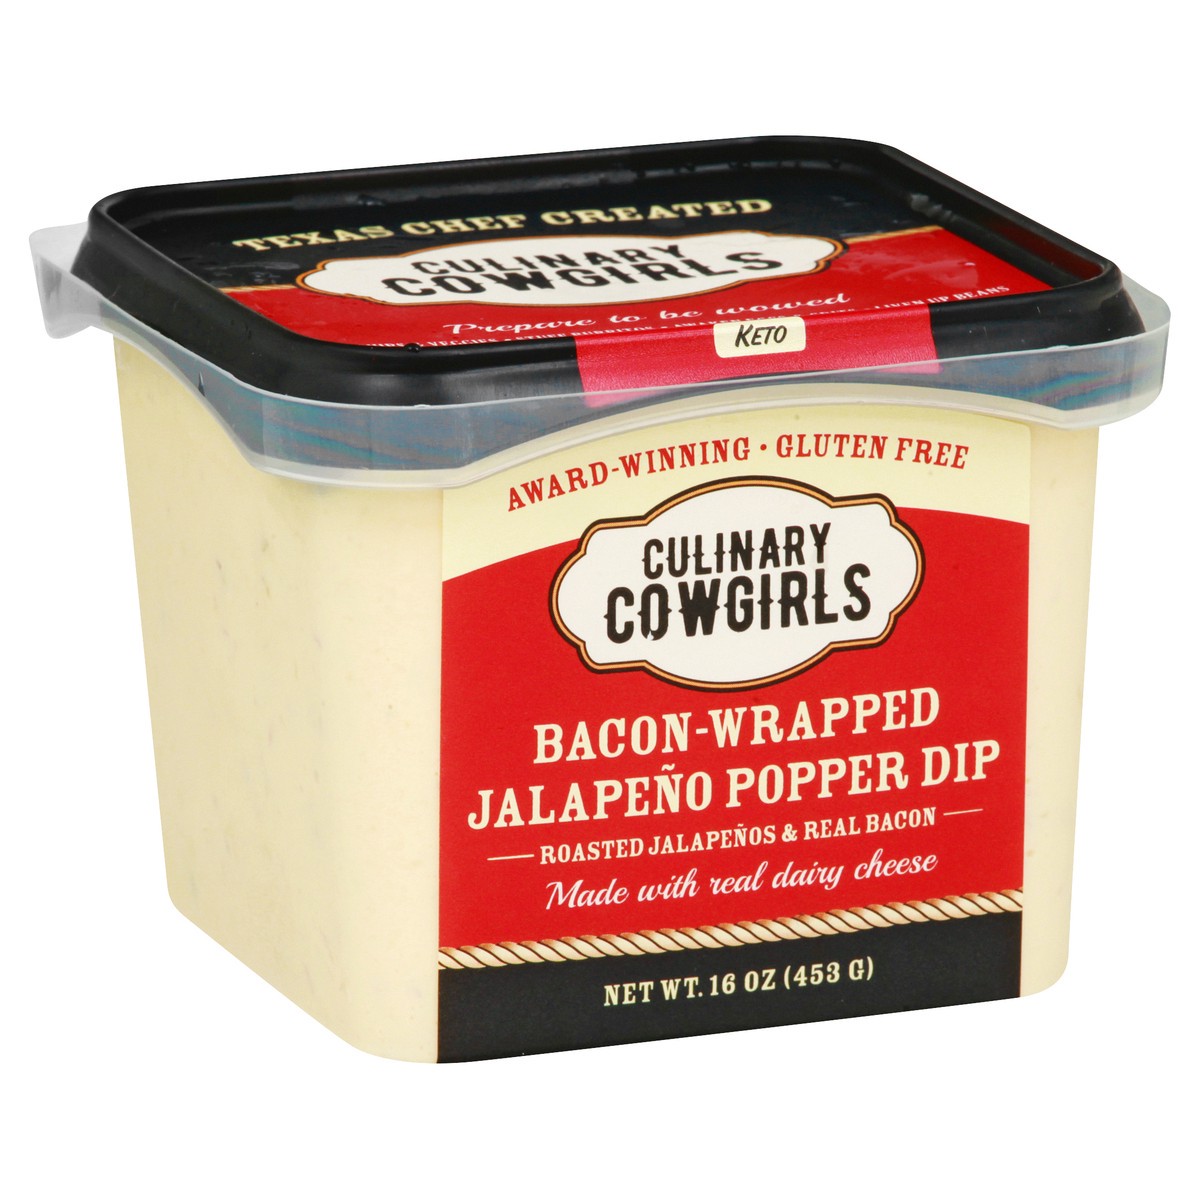 slide 8 of 13, Culinary Cowgirls Bacon-Wrapped Jalapeno Popper Dip 16 oz, 16 oz